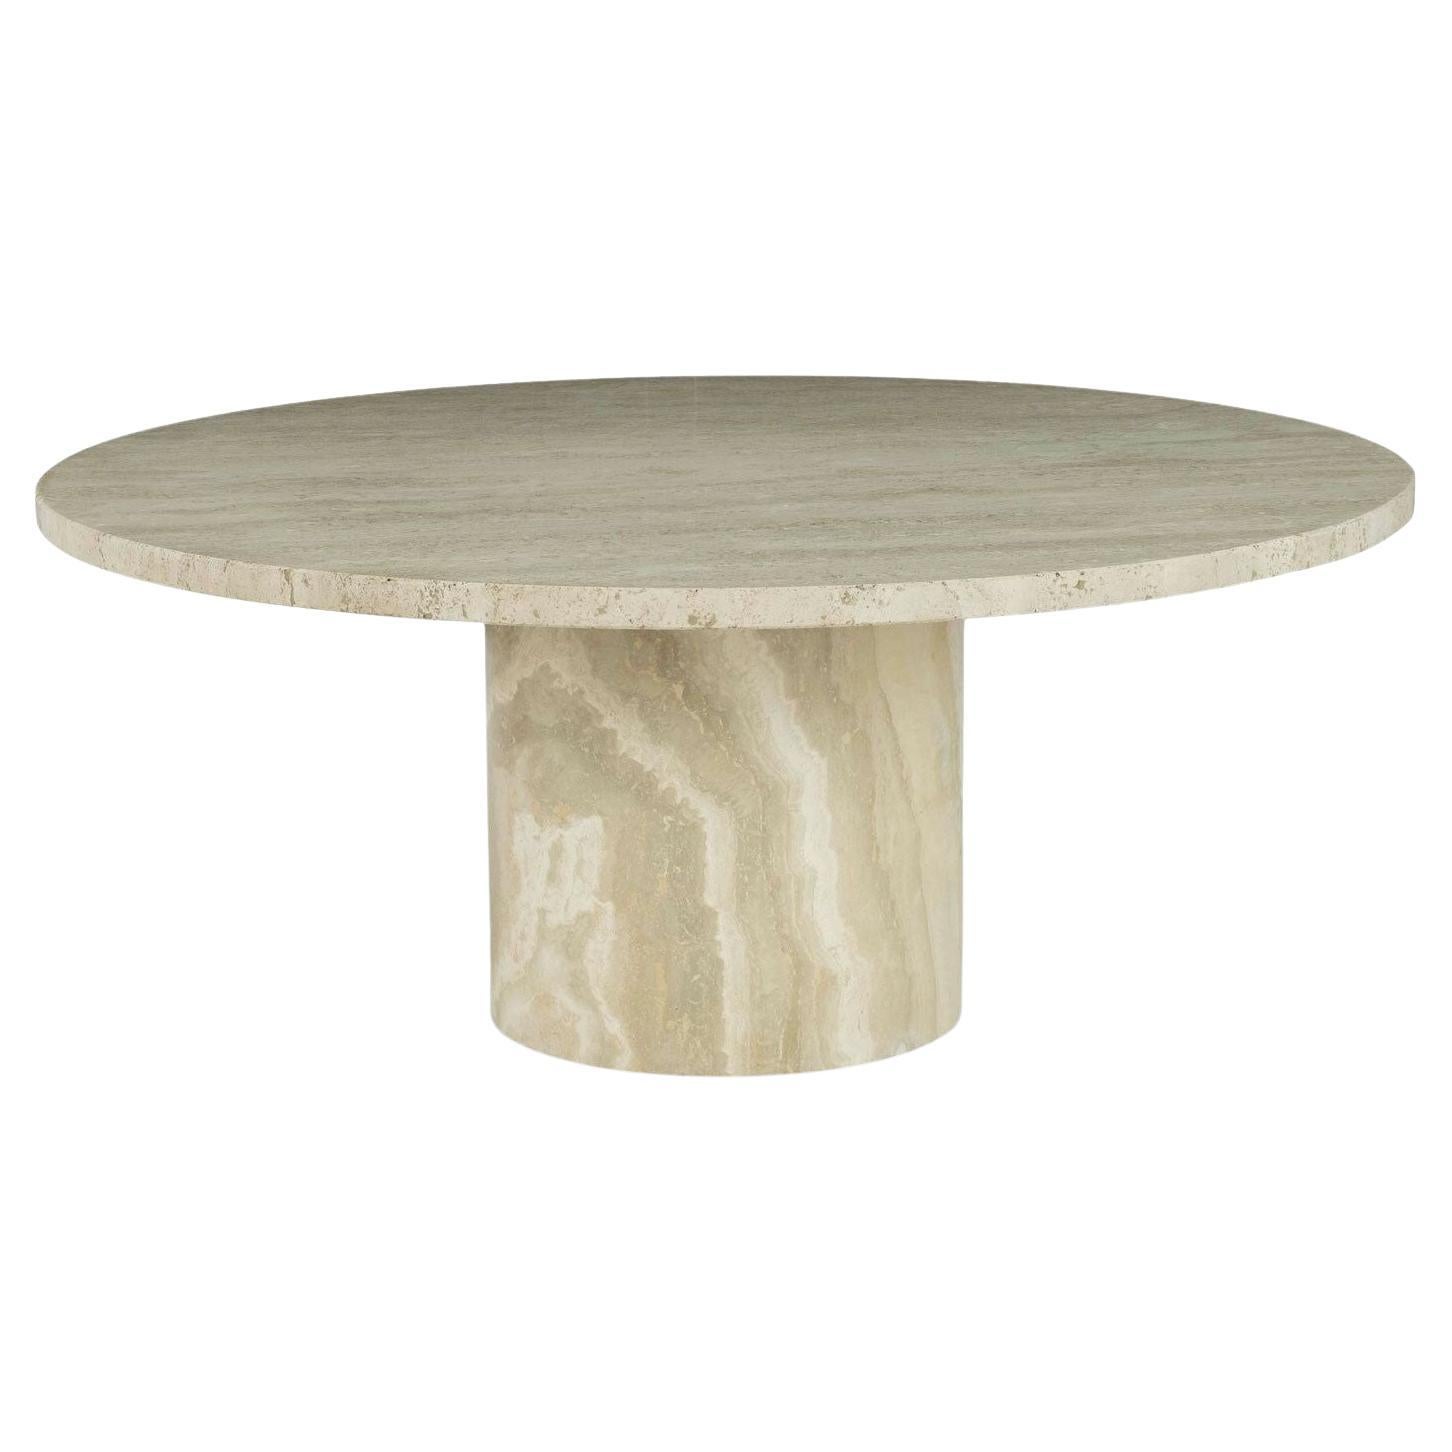 Round Polished Travertine Coffee Table